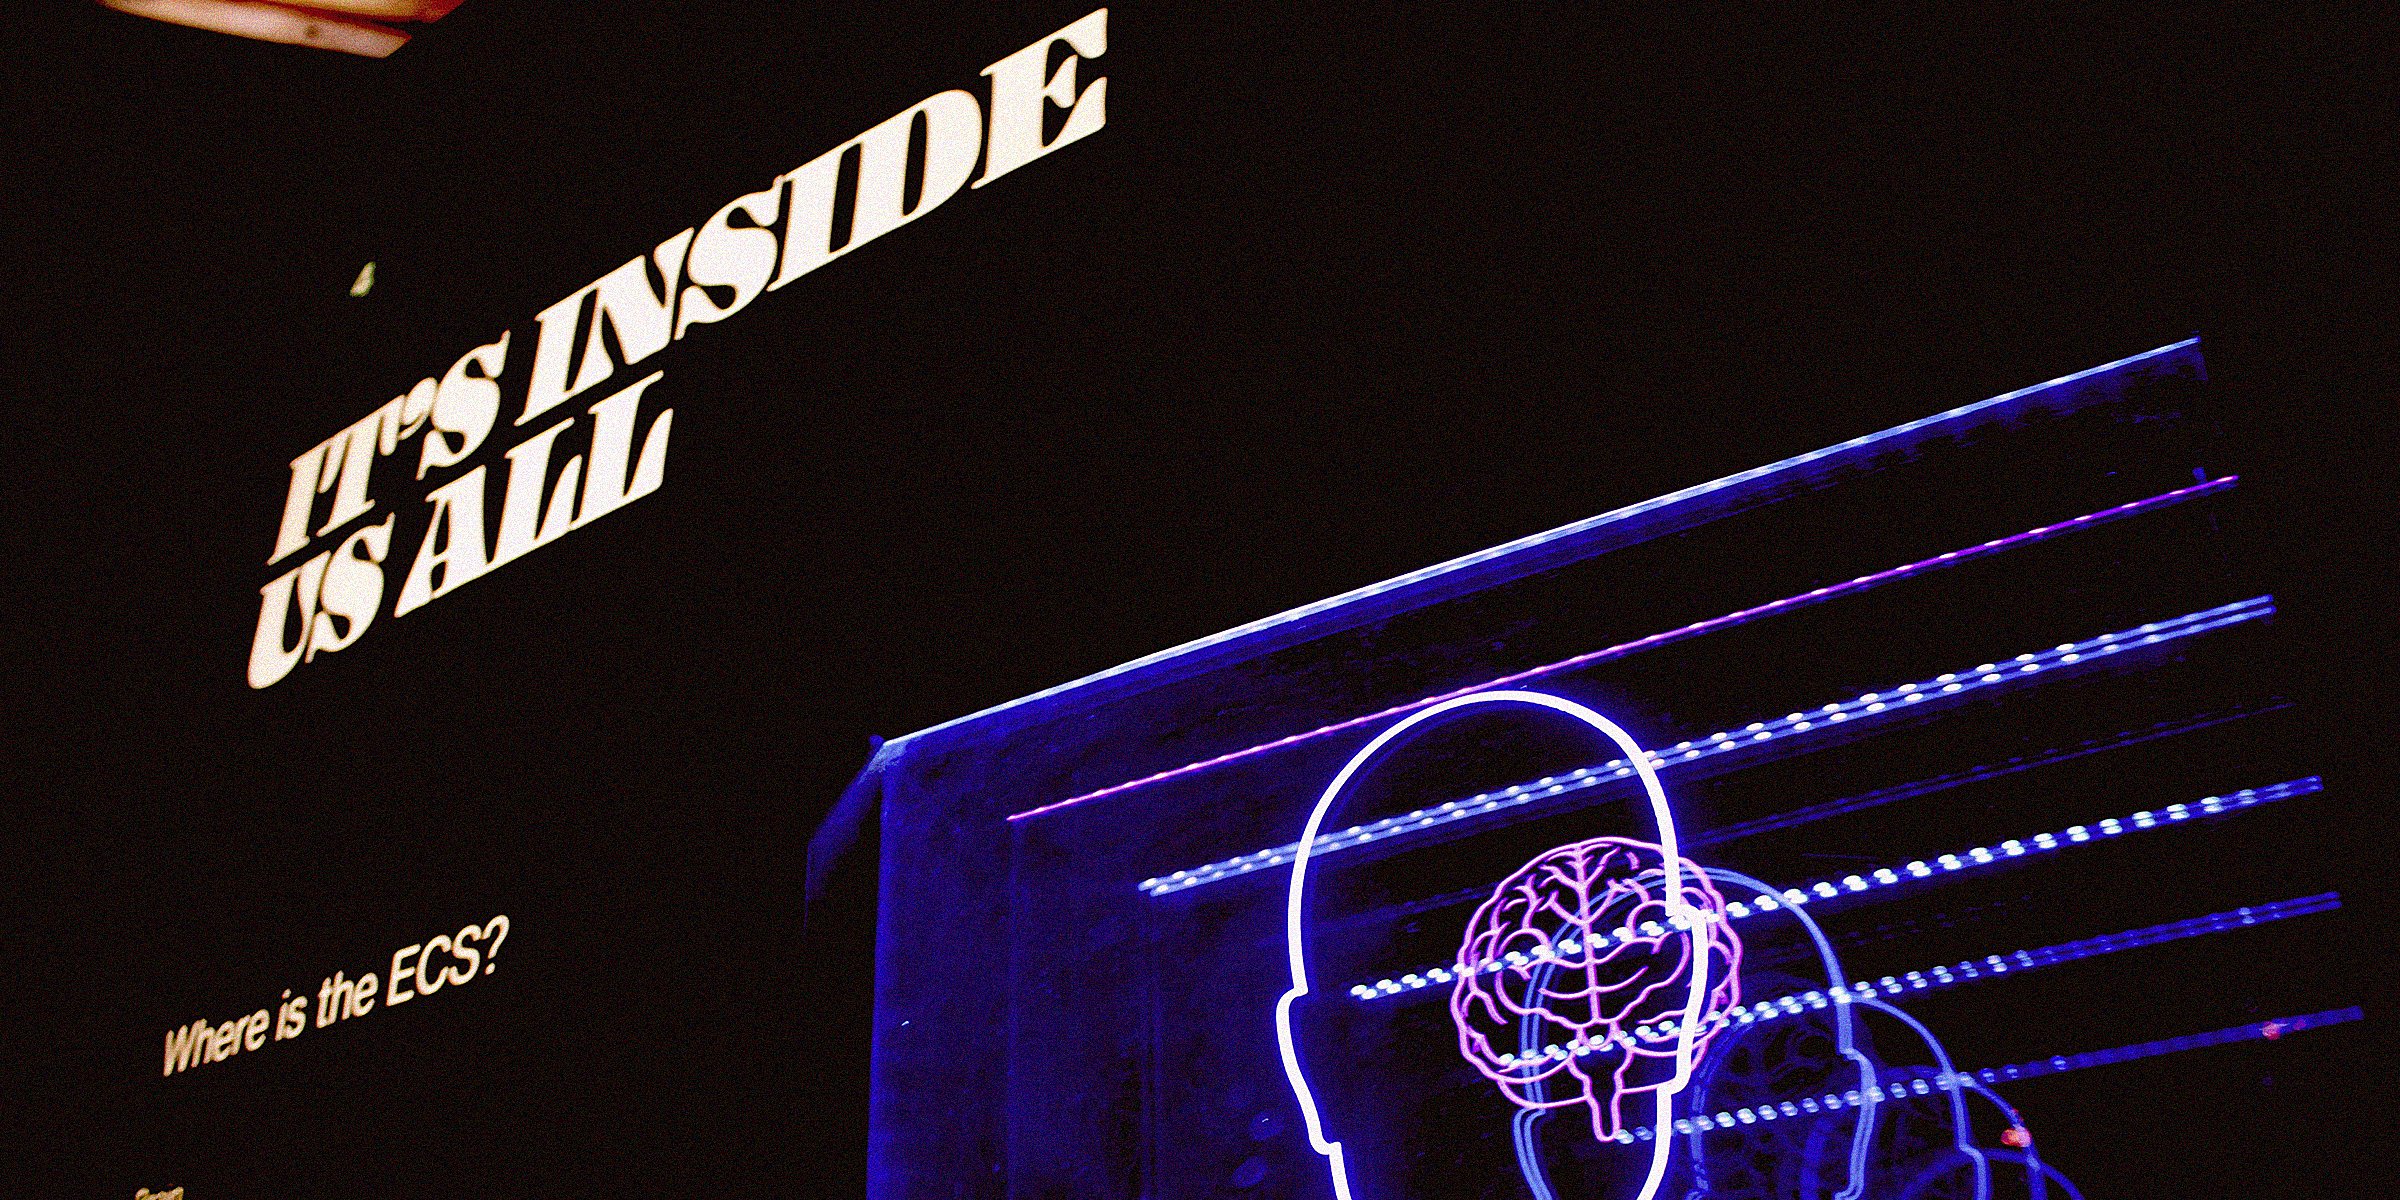 Neon structure next to copy that reads 'It's inside us all' and 'Where is the ECS?'' | Source: Unsplash